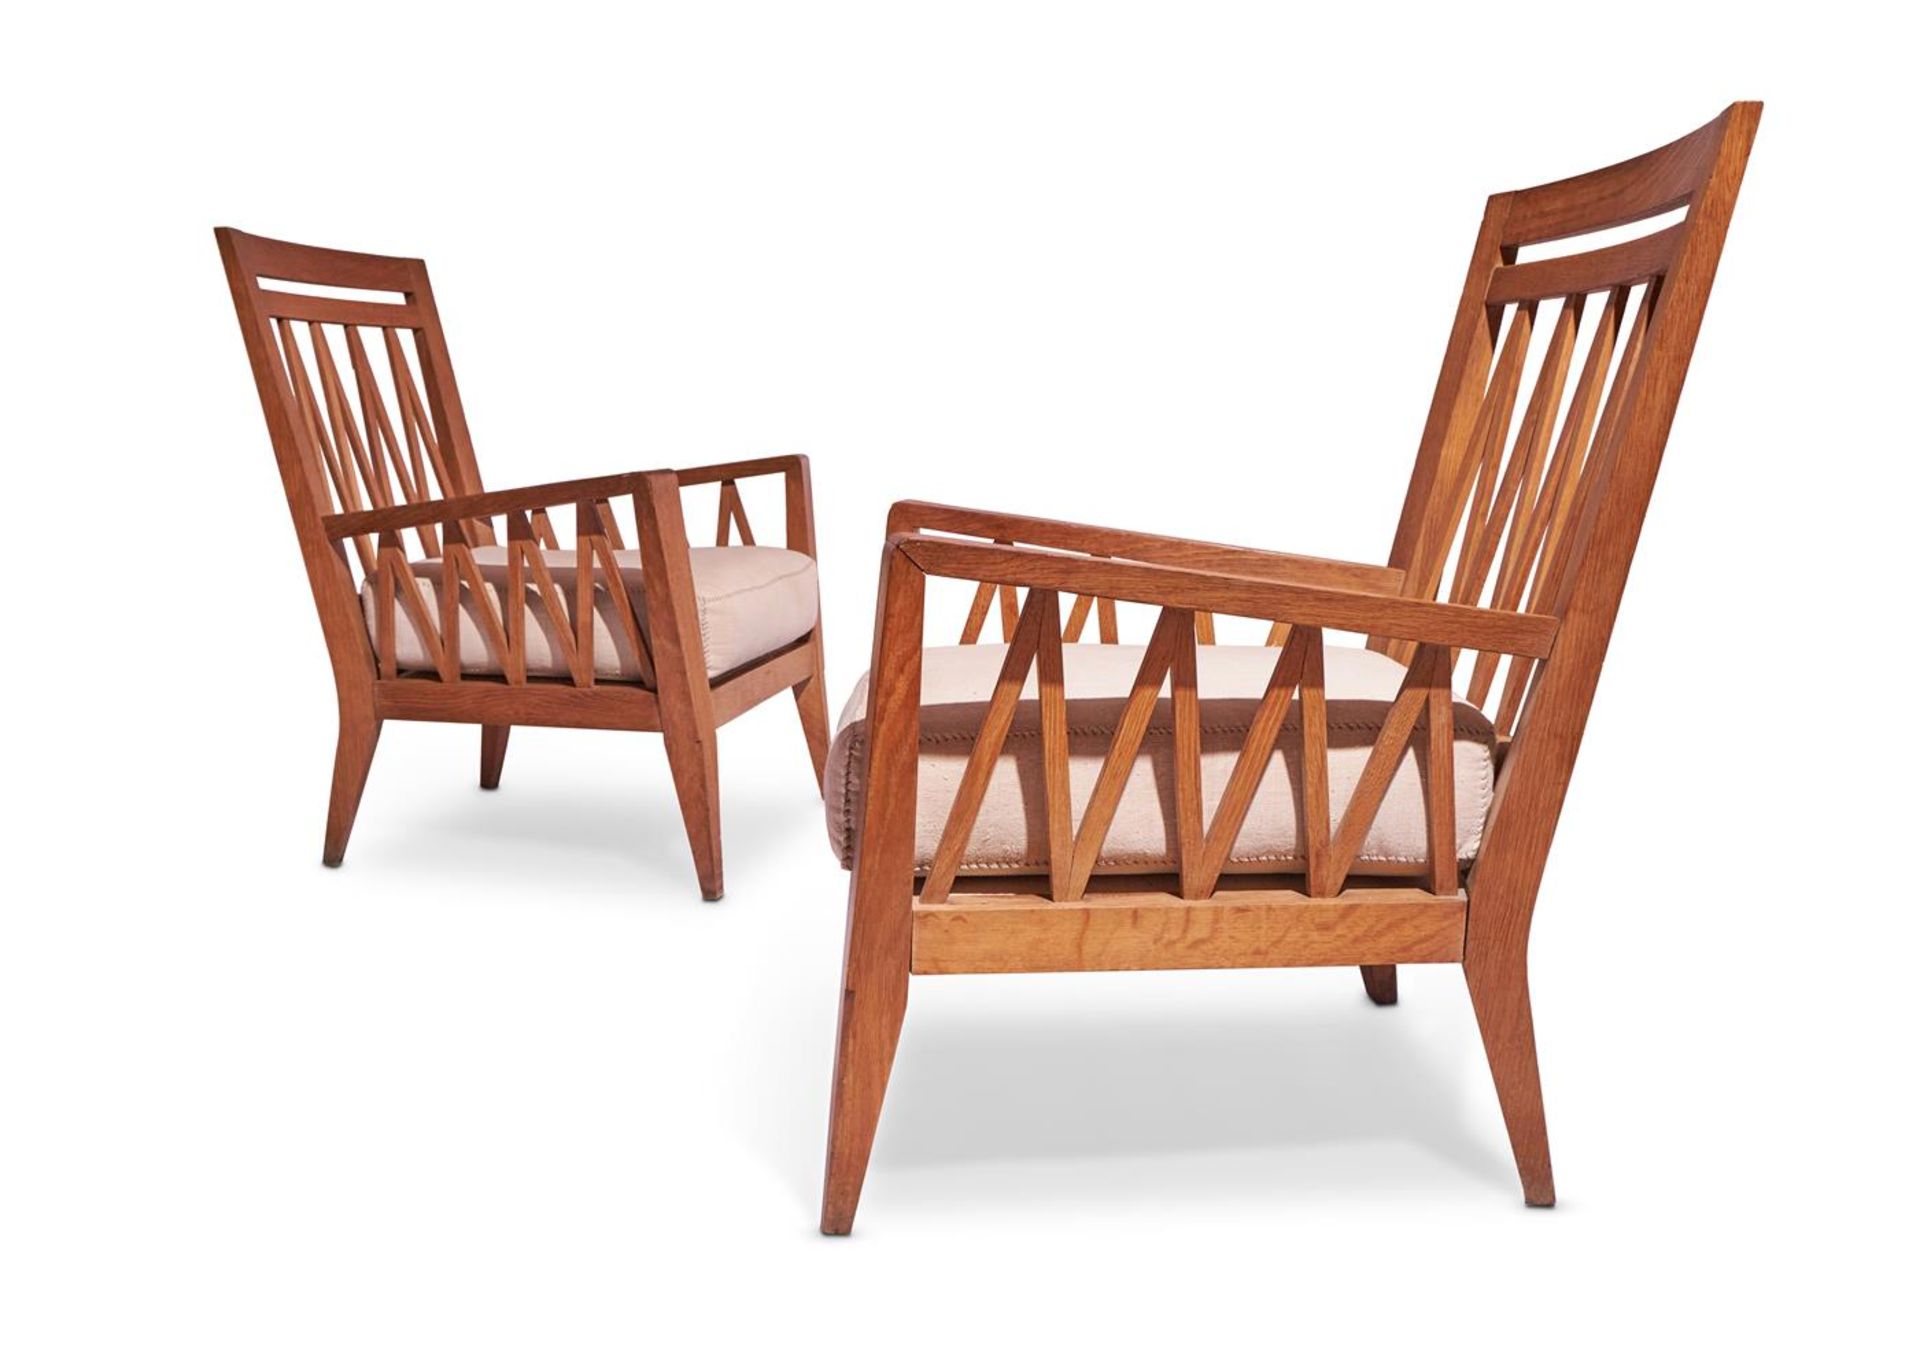 A PAIR OF OAK ARMCHAIRS ATTRIBUTED TO RENE GABRIEL (1890-1950), FRENCH - Bild 4 aus 4